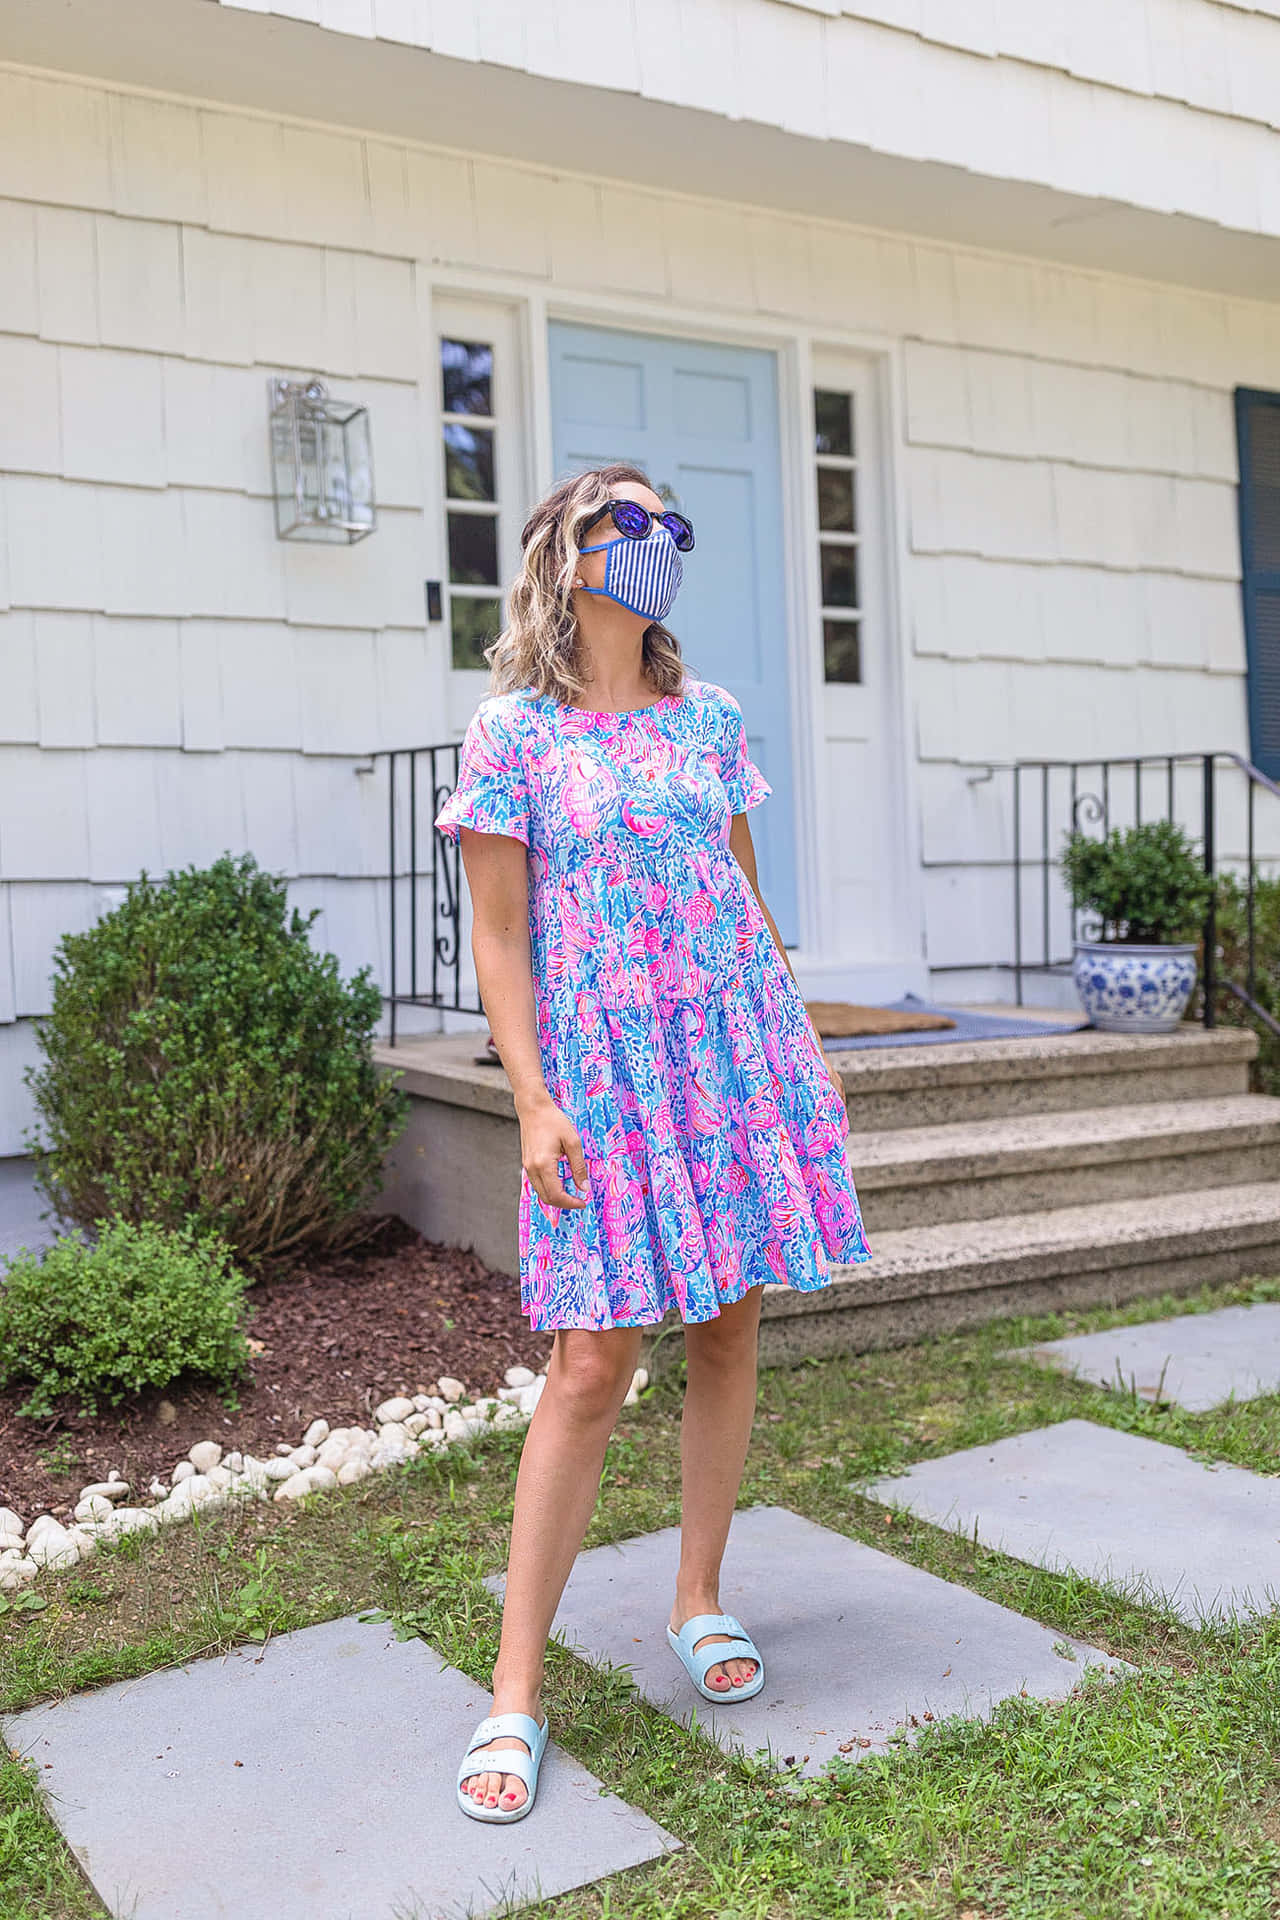 Get ready for a day of Summer fun in style with Lilly Pulitzer